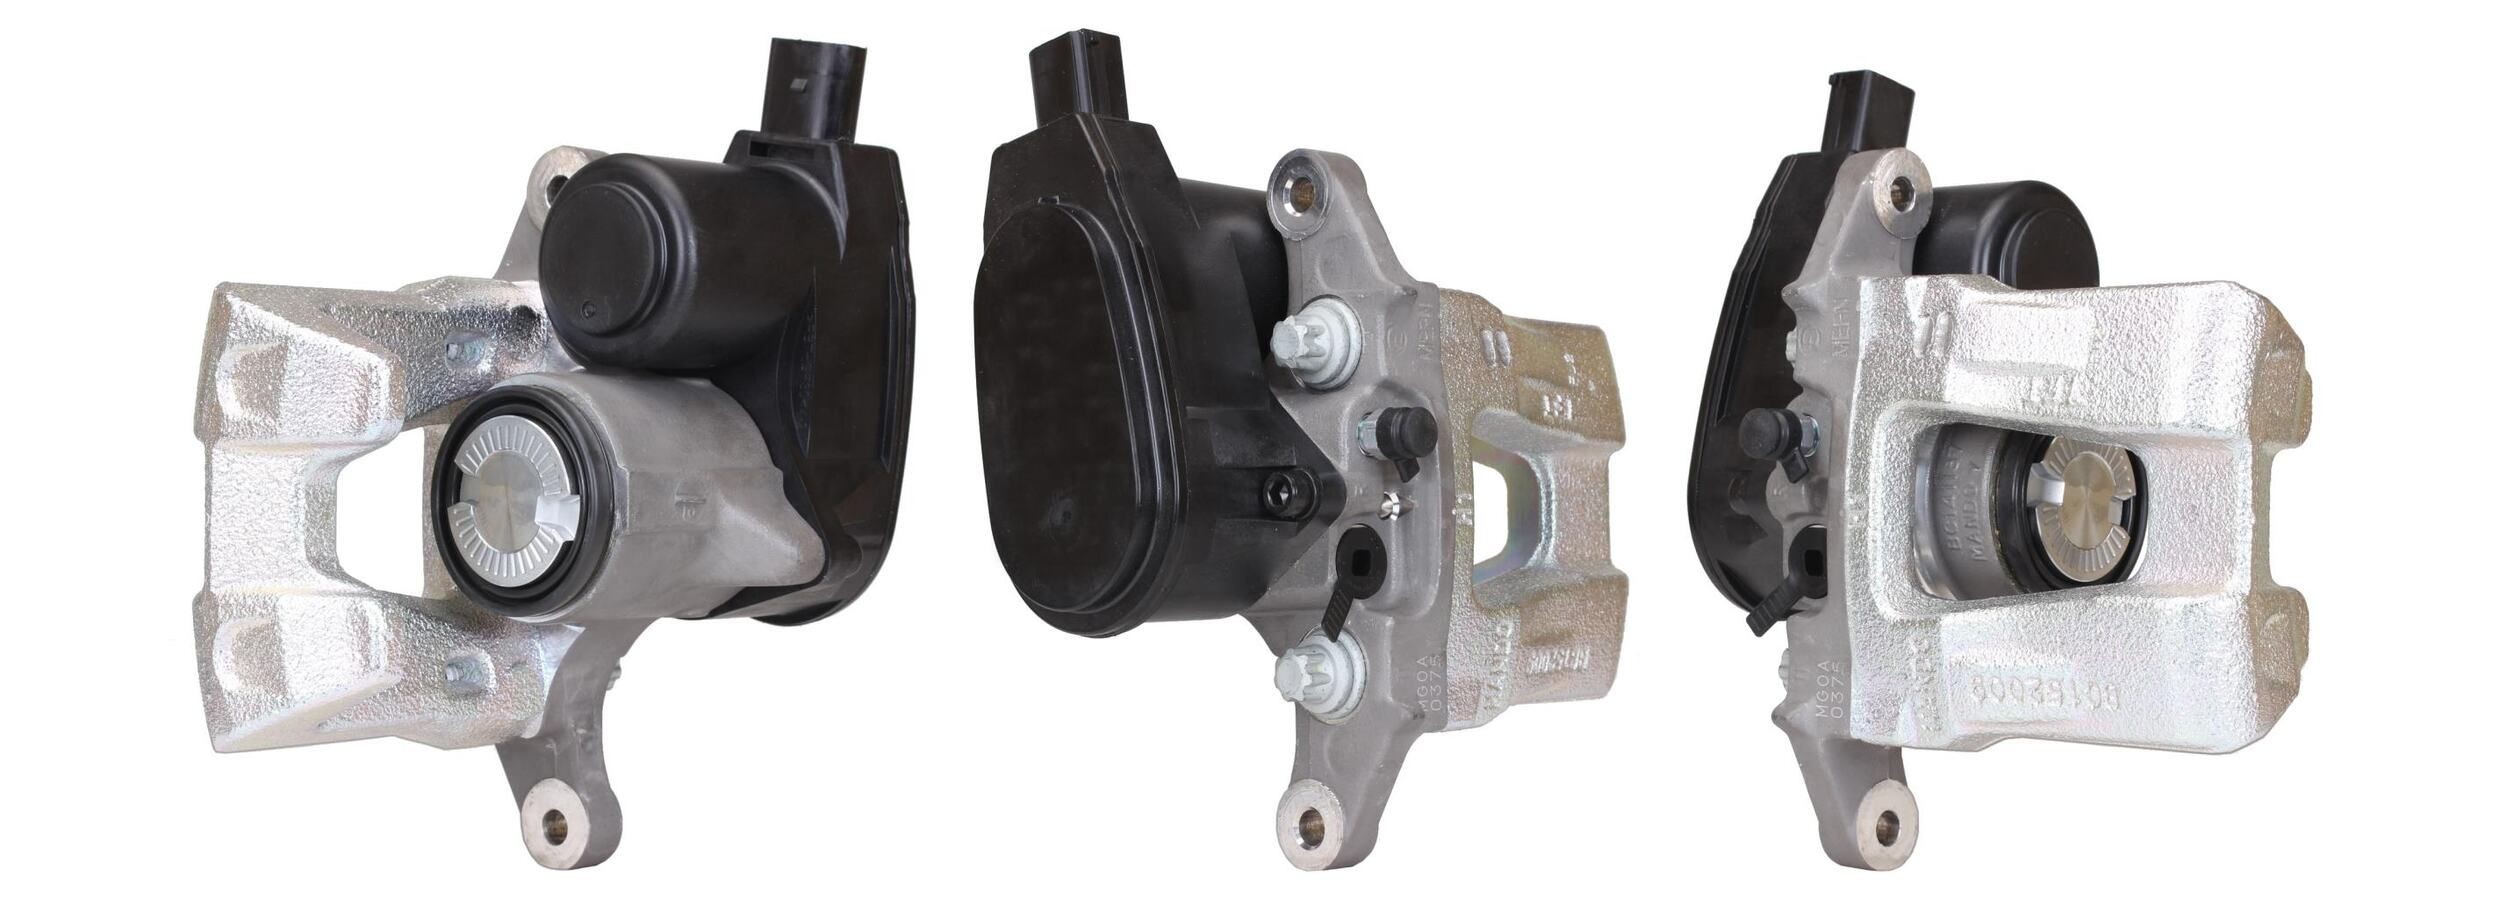 87-2323 ELSTOCK Brake calipers HYUNDAI Rear Axle Right, behind the axle, for vehicles with electric parking brake